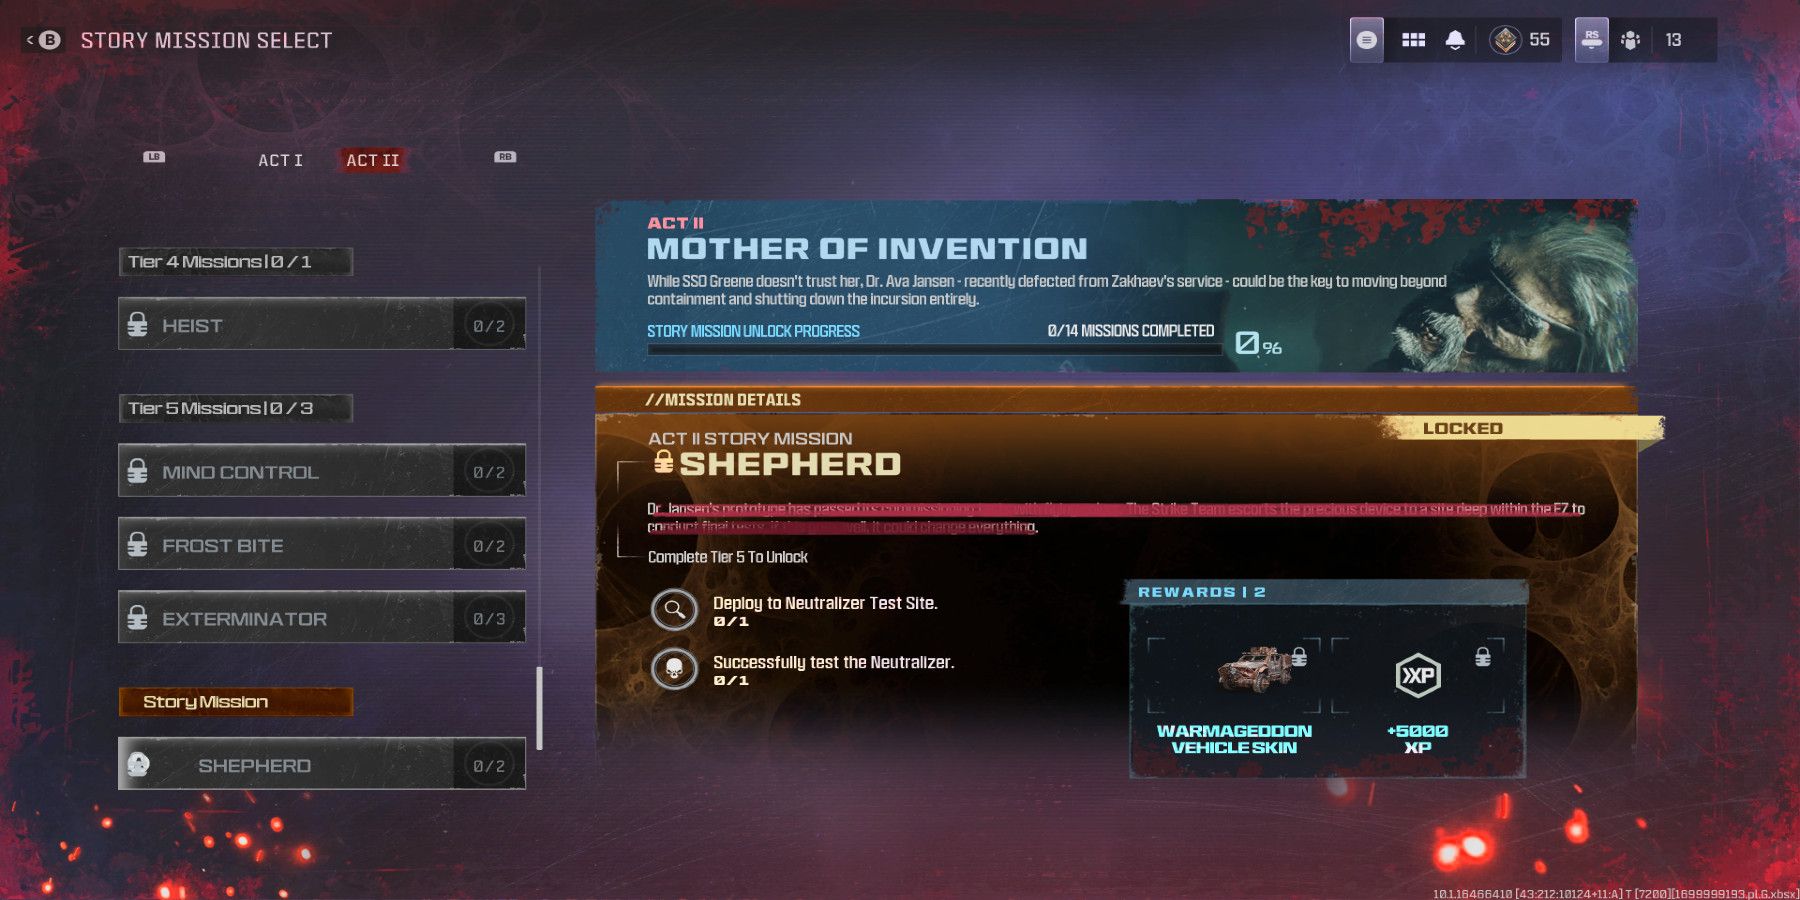 mw3 - mother of invention - story mission